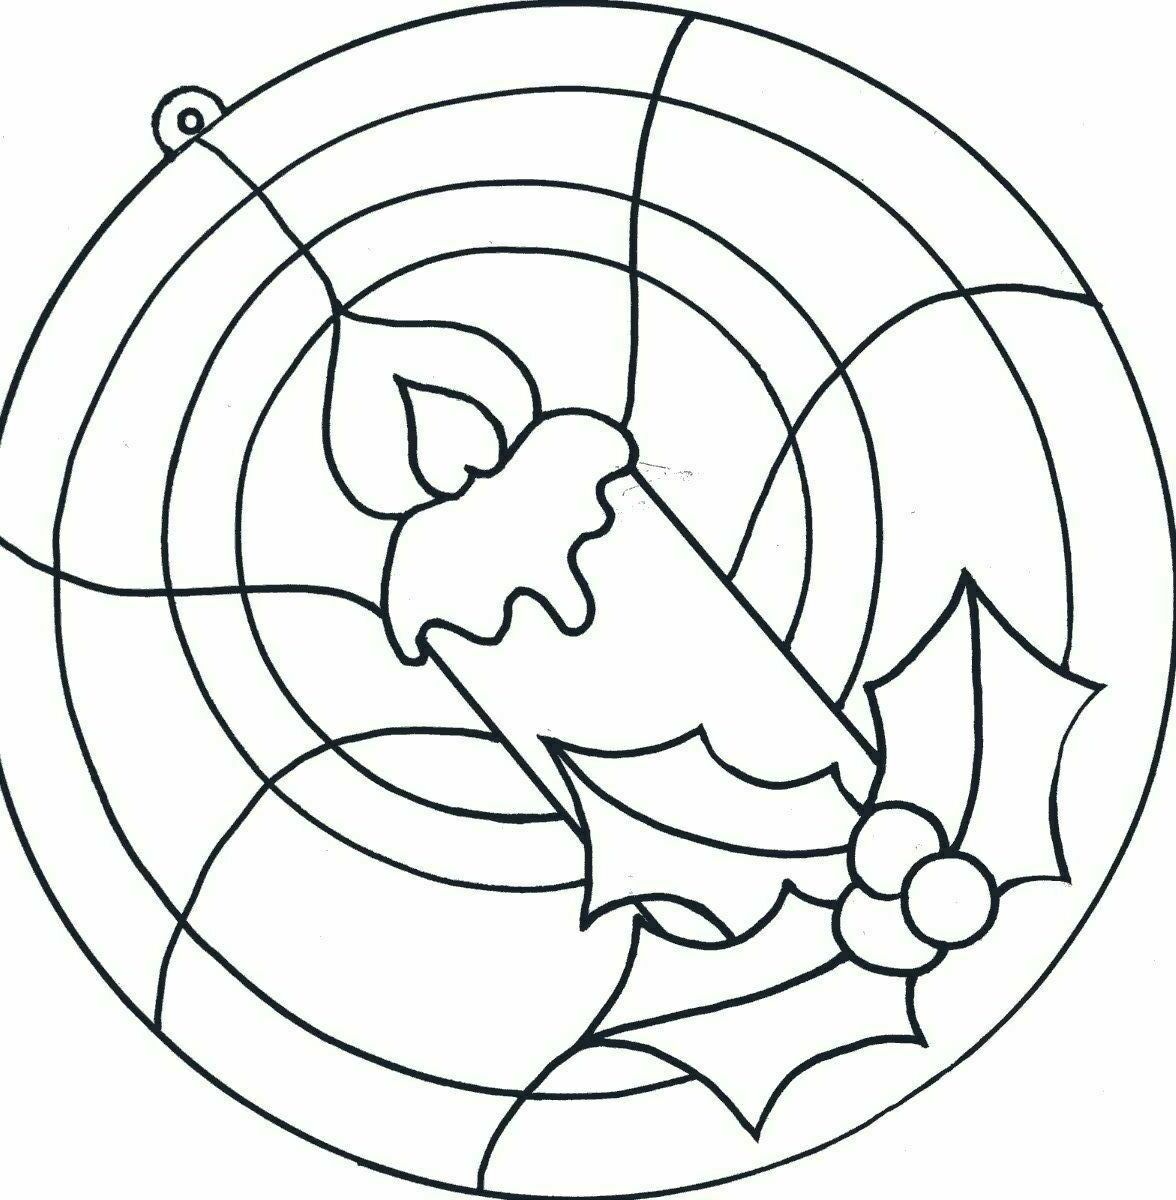 Free Stained Glass Coloring Pages: 40 Collections - VoteForVerde.com